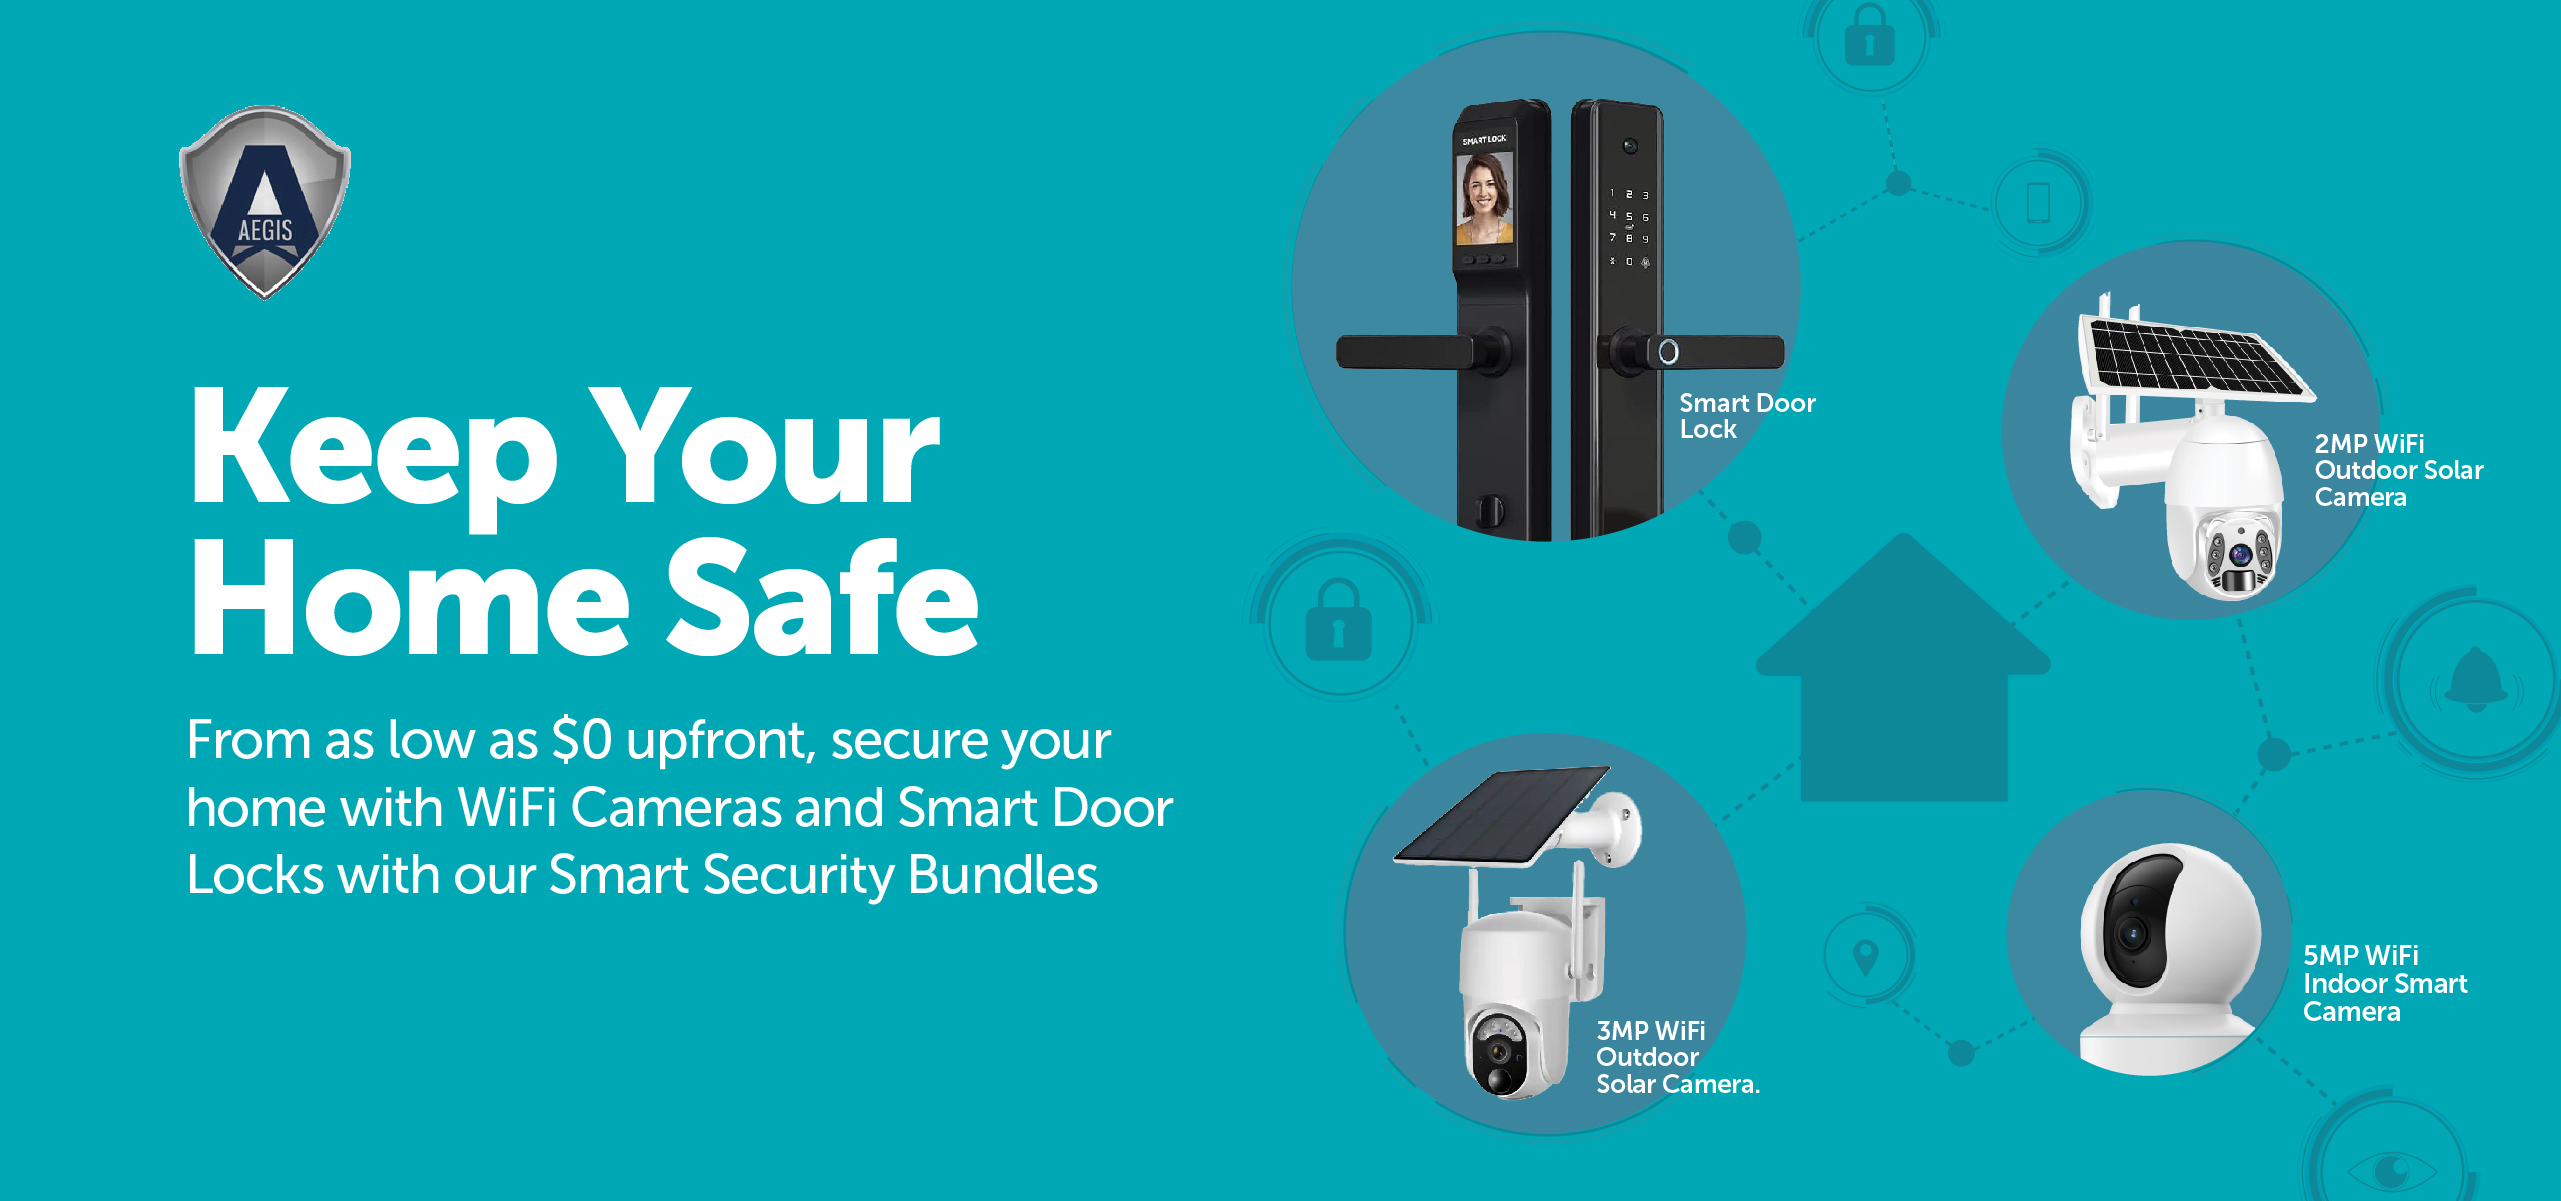 Stay safe with our Smart Security Bundles